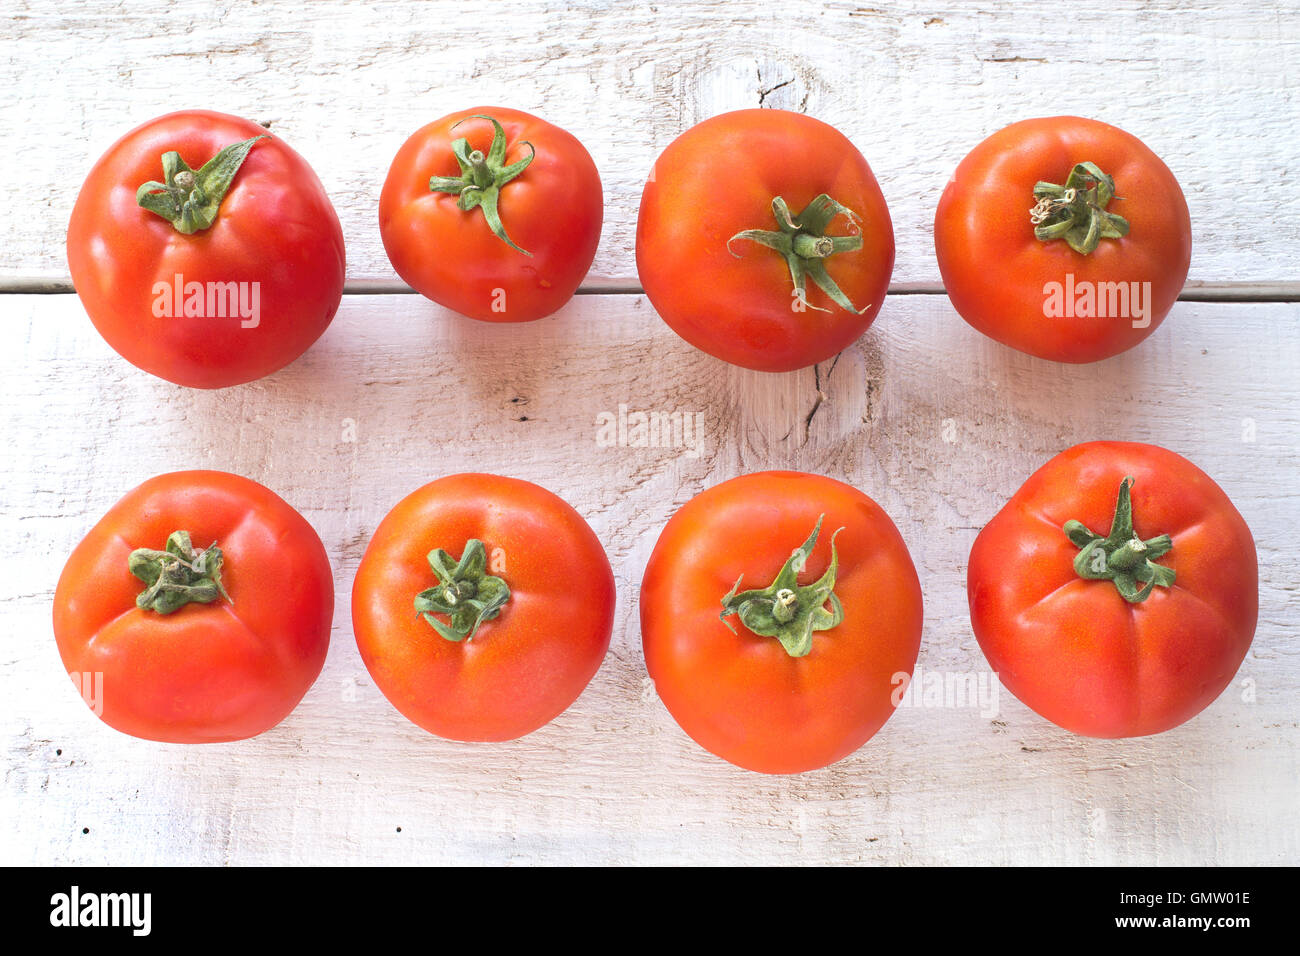 Tomatoes on white wooden surface Stock Photo